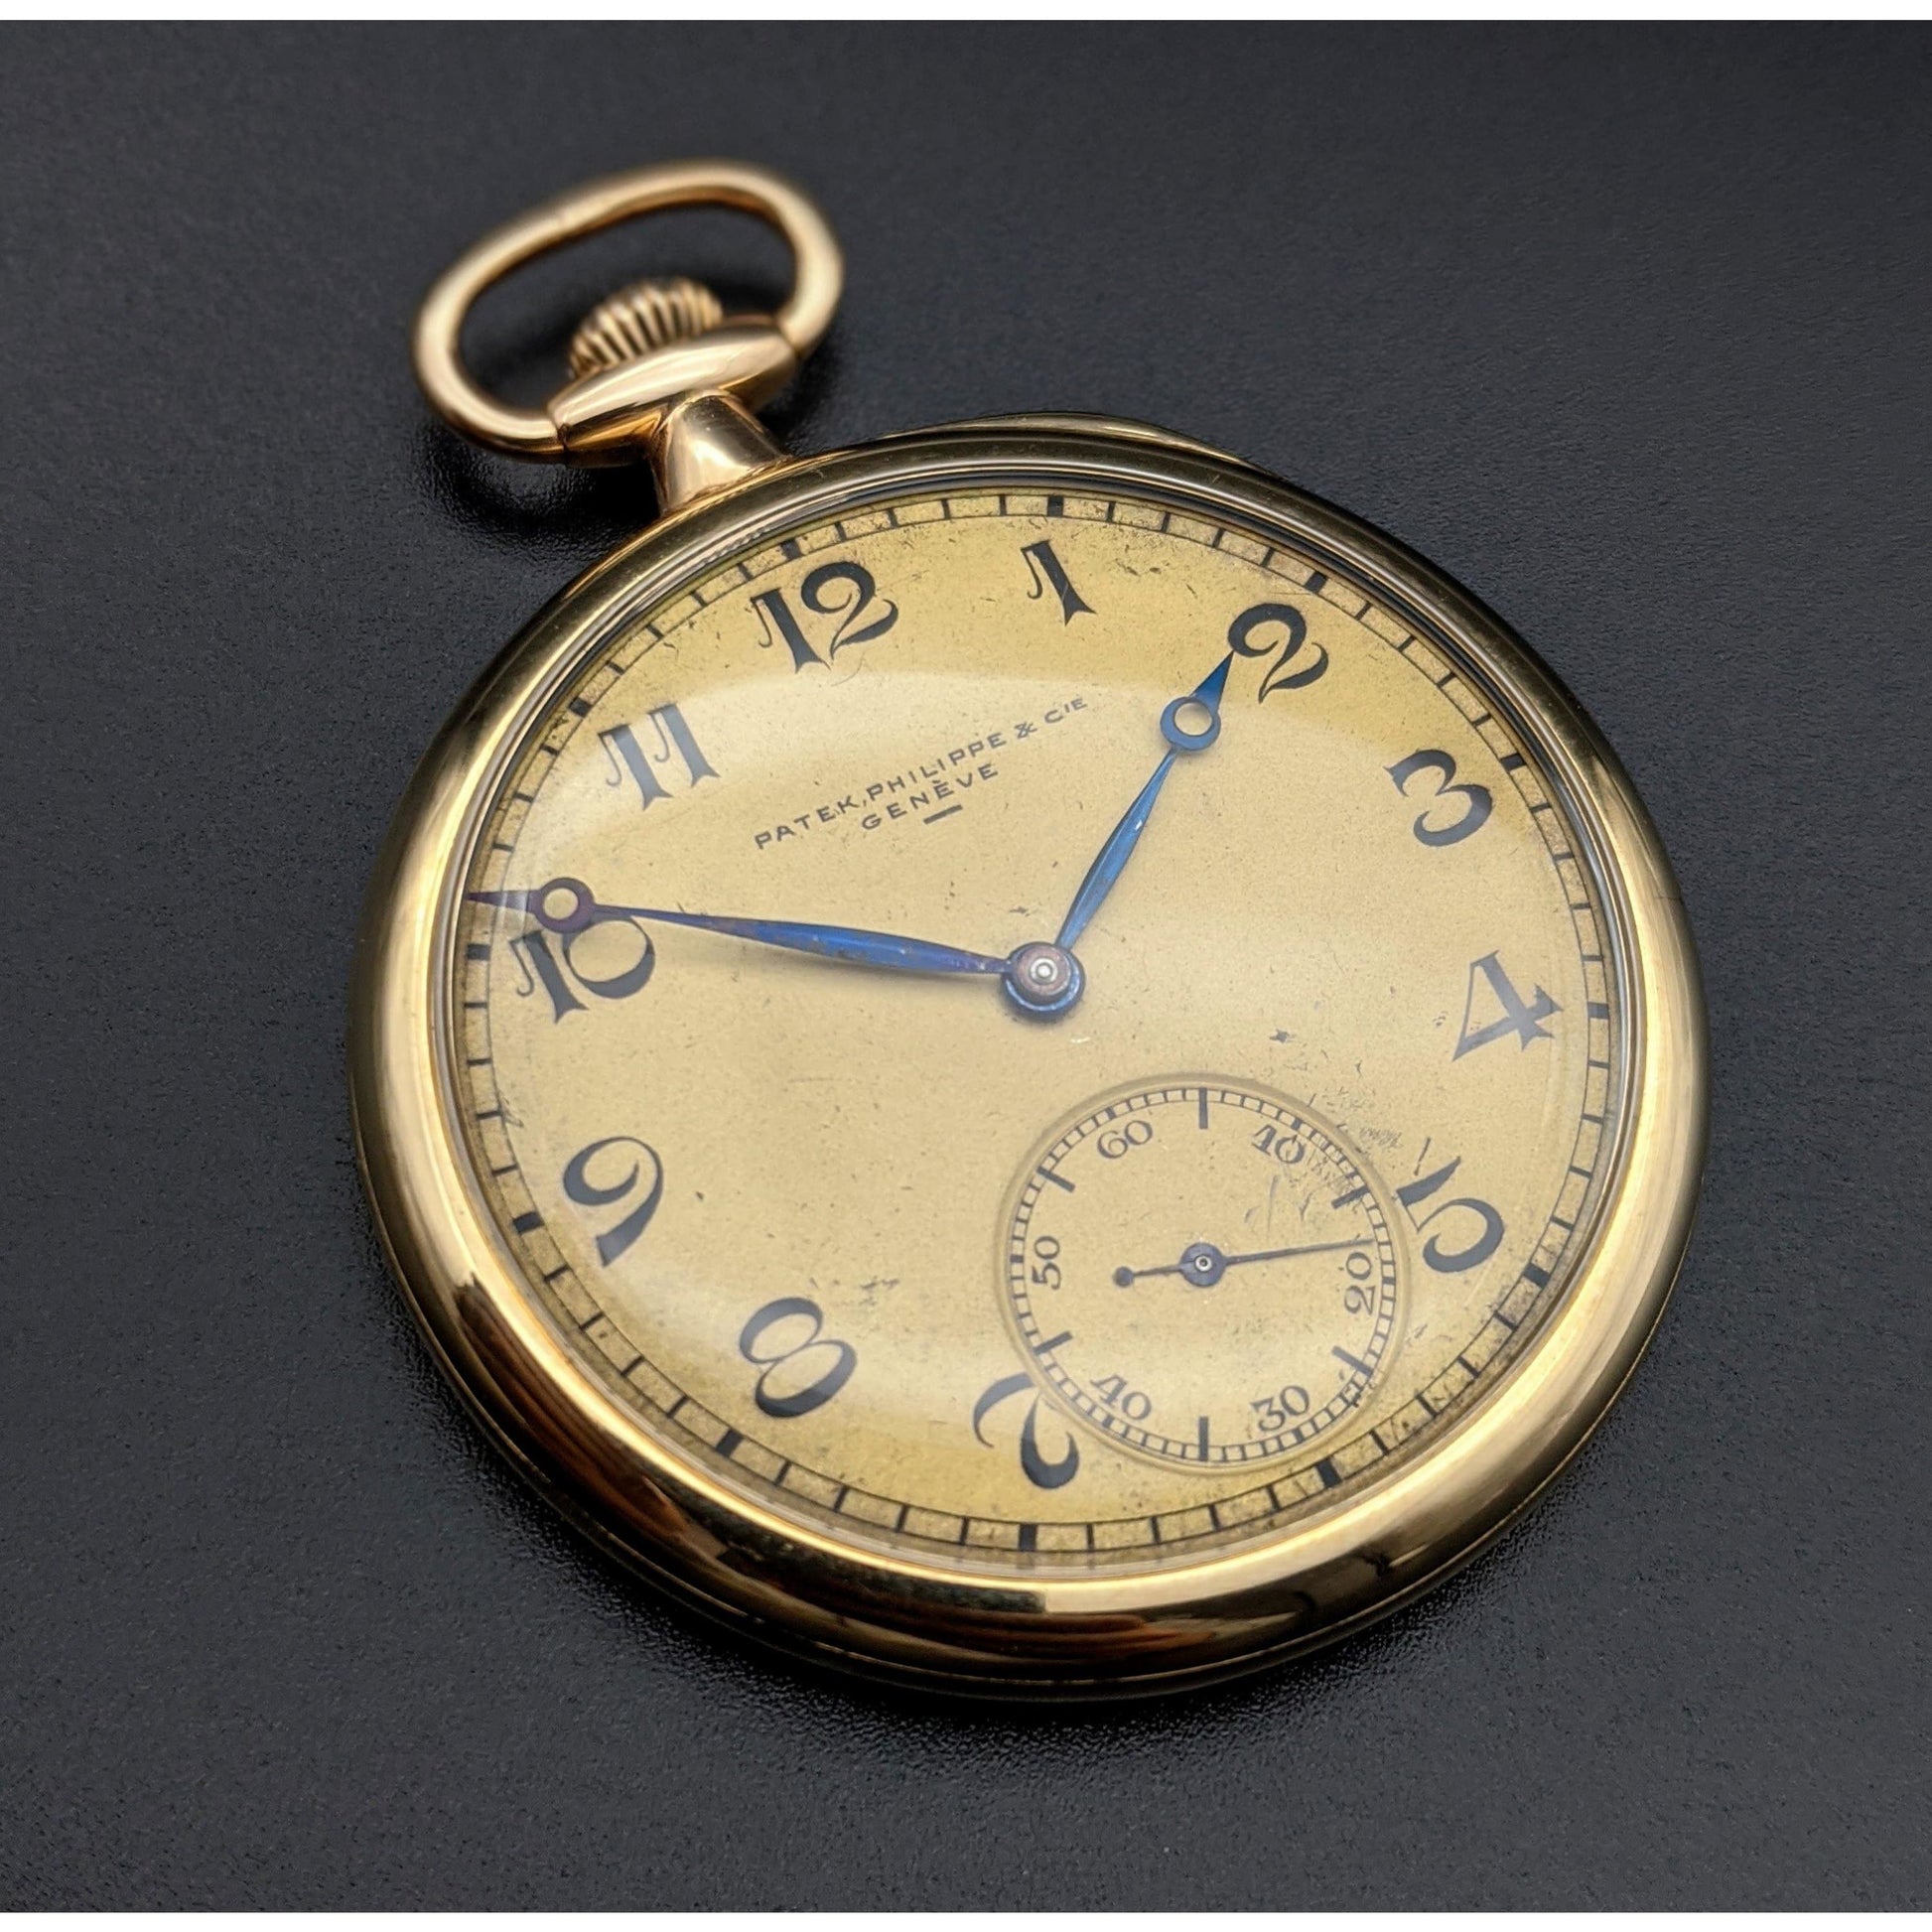 Patek Philippe 1924 unique Geneve Gold with Extract from  Patek Philippe Archives - E-V-W.com